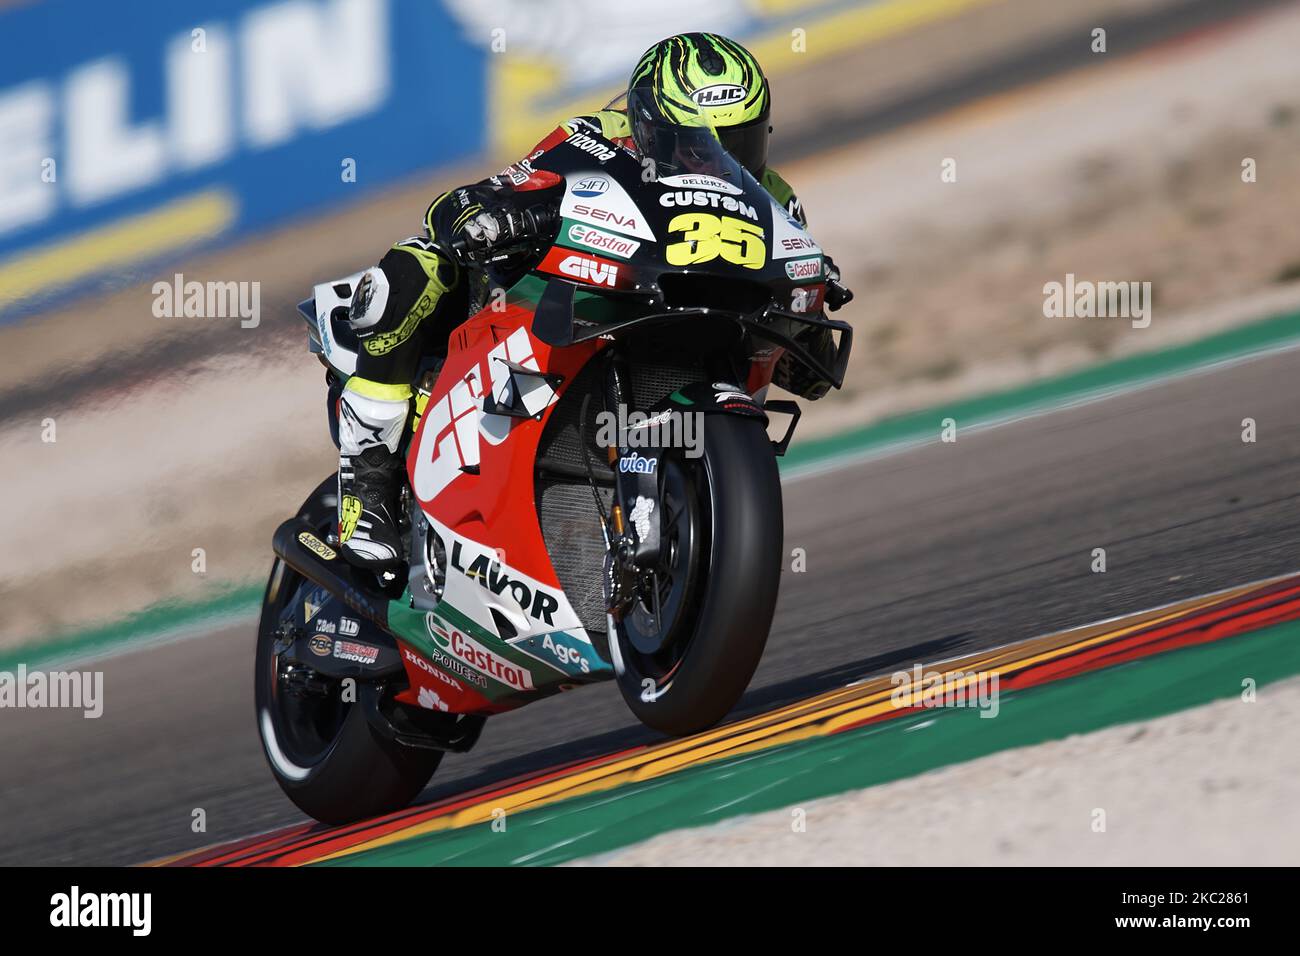 Cal Crutchlow (35) of England and LCR Honda Castrol during the MotoGP of Aragon at Motorland Aragon Circuit on October 18, 2020 in Alcaniz, Spain. (Photo by Jose Breton/Pics Action/NurPhoto) Stock Photo